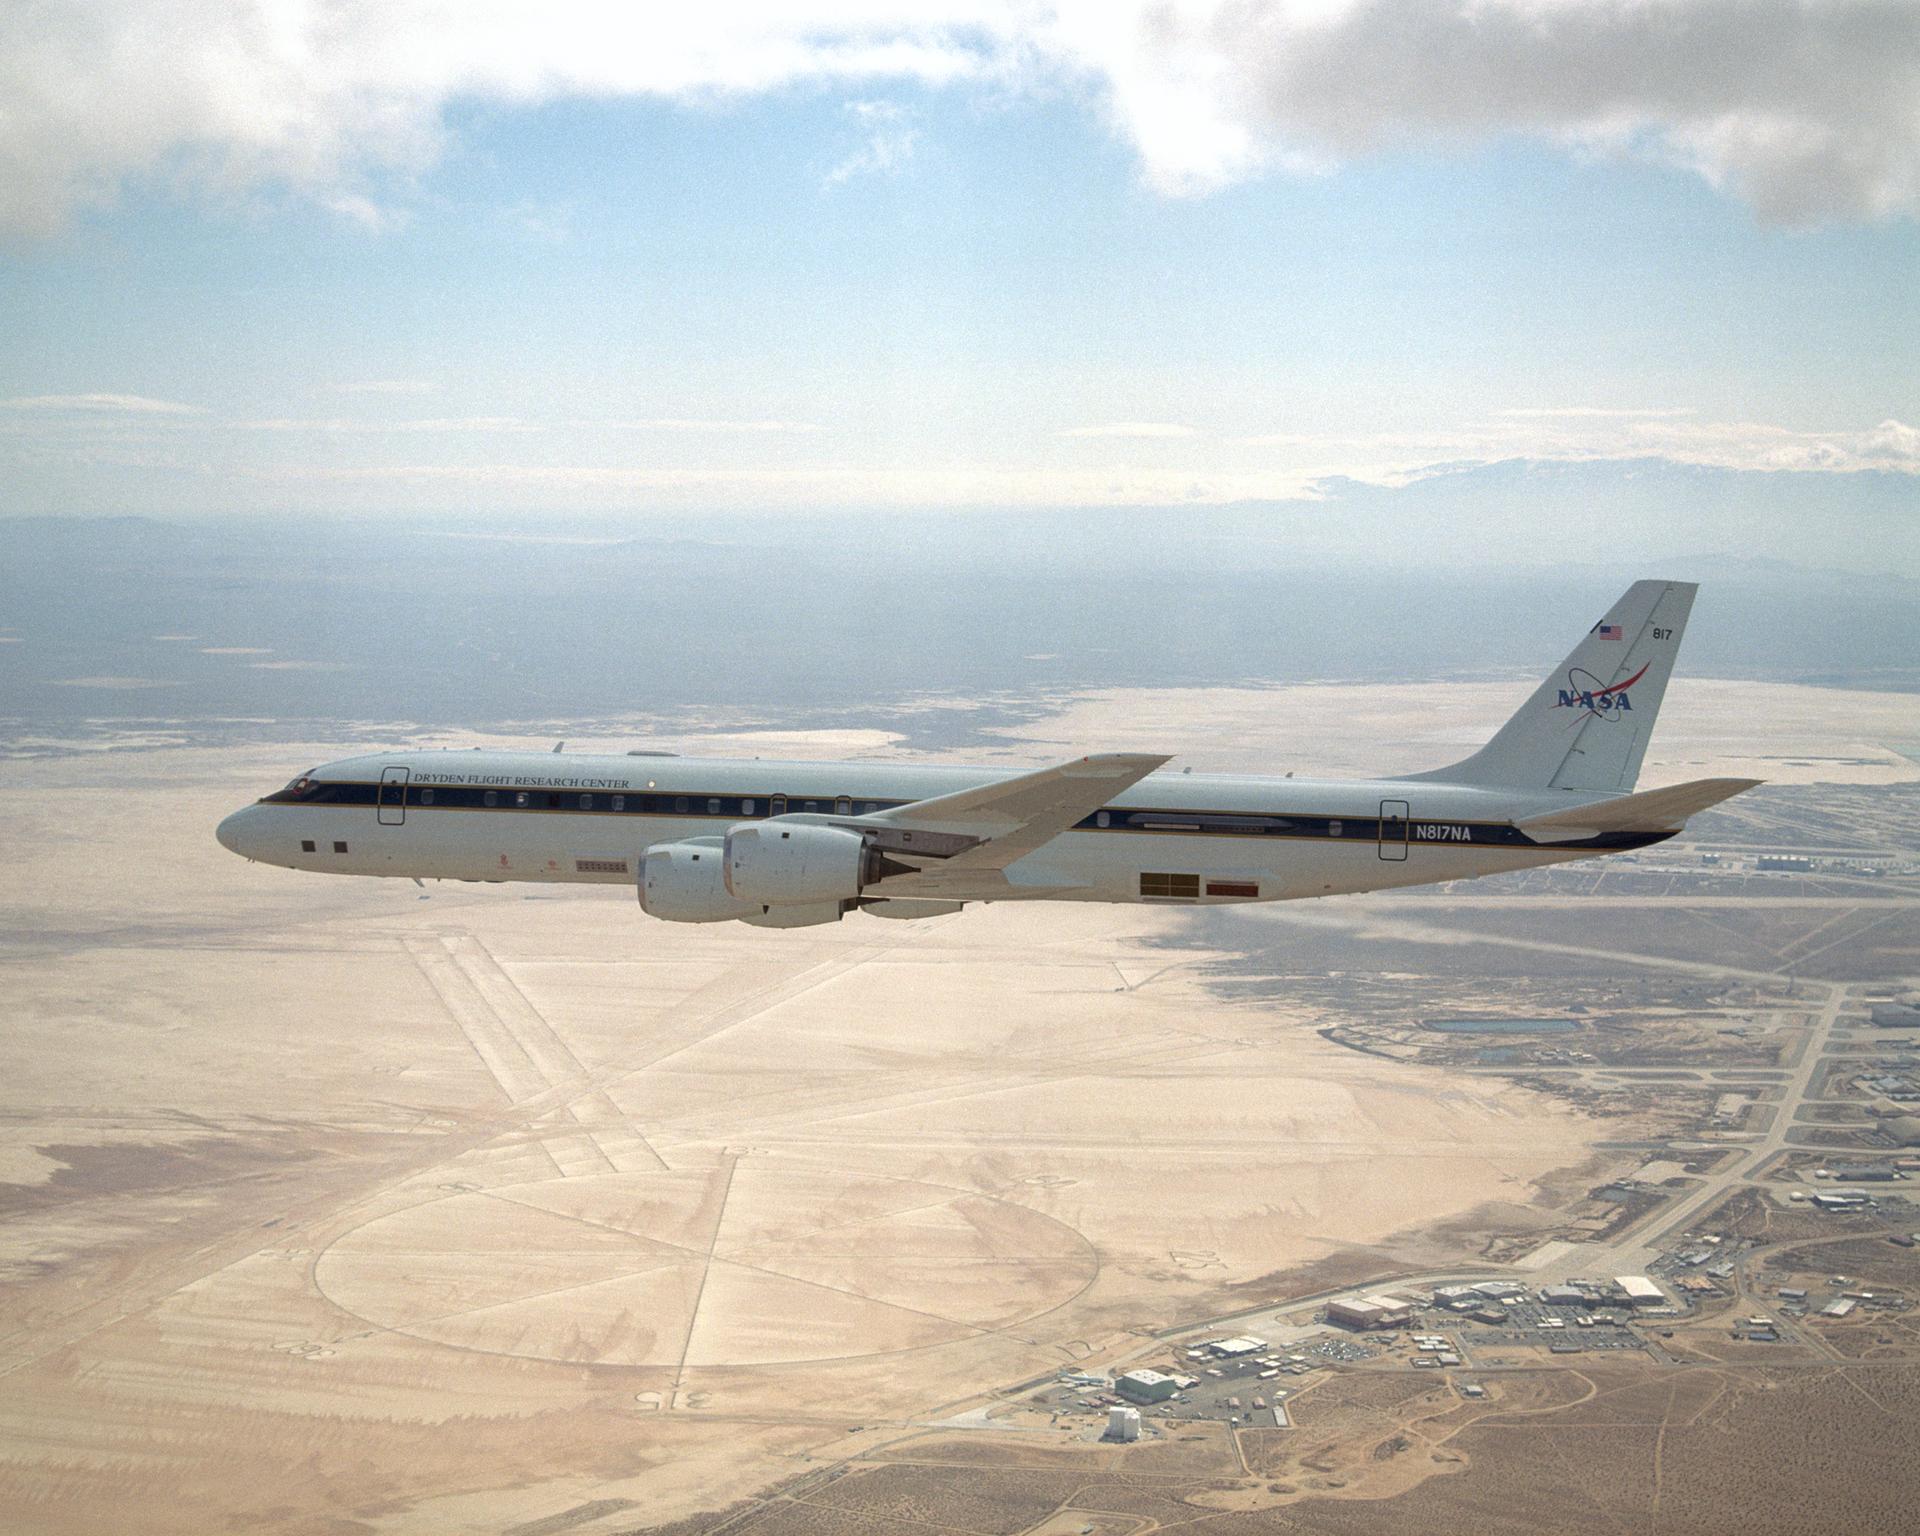 The DC-8 in flight over Armstrong Flight Research Center